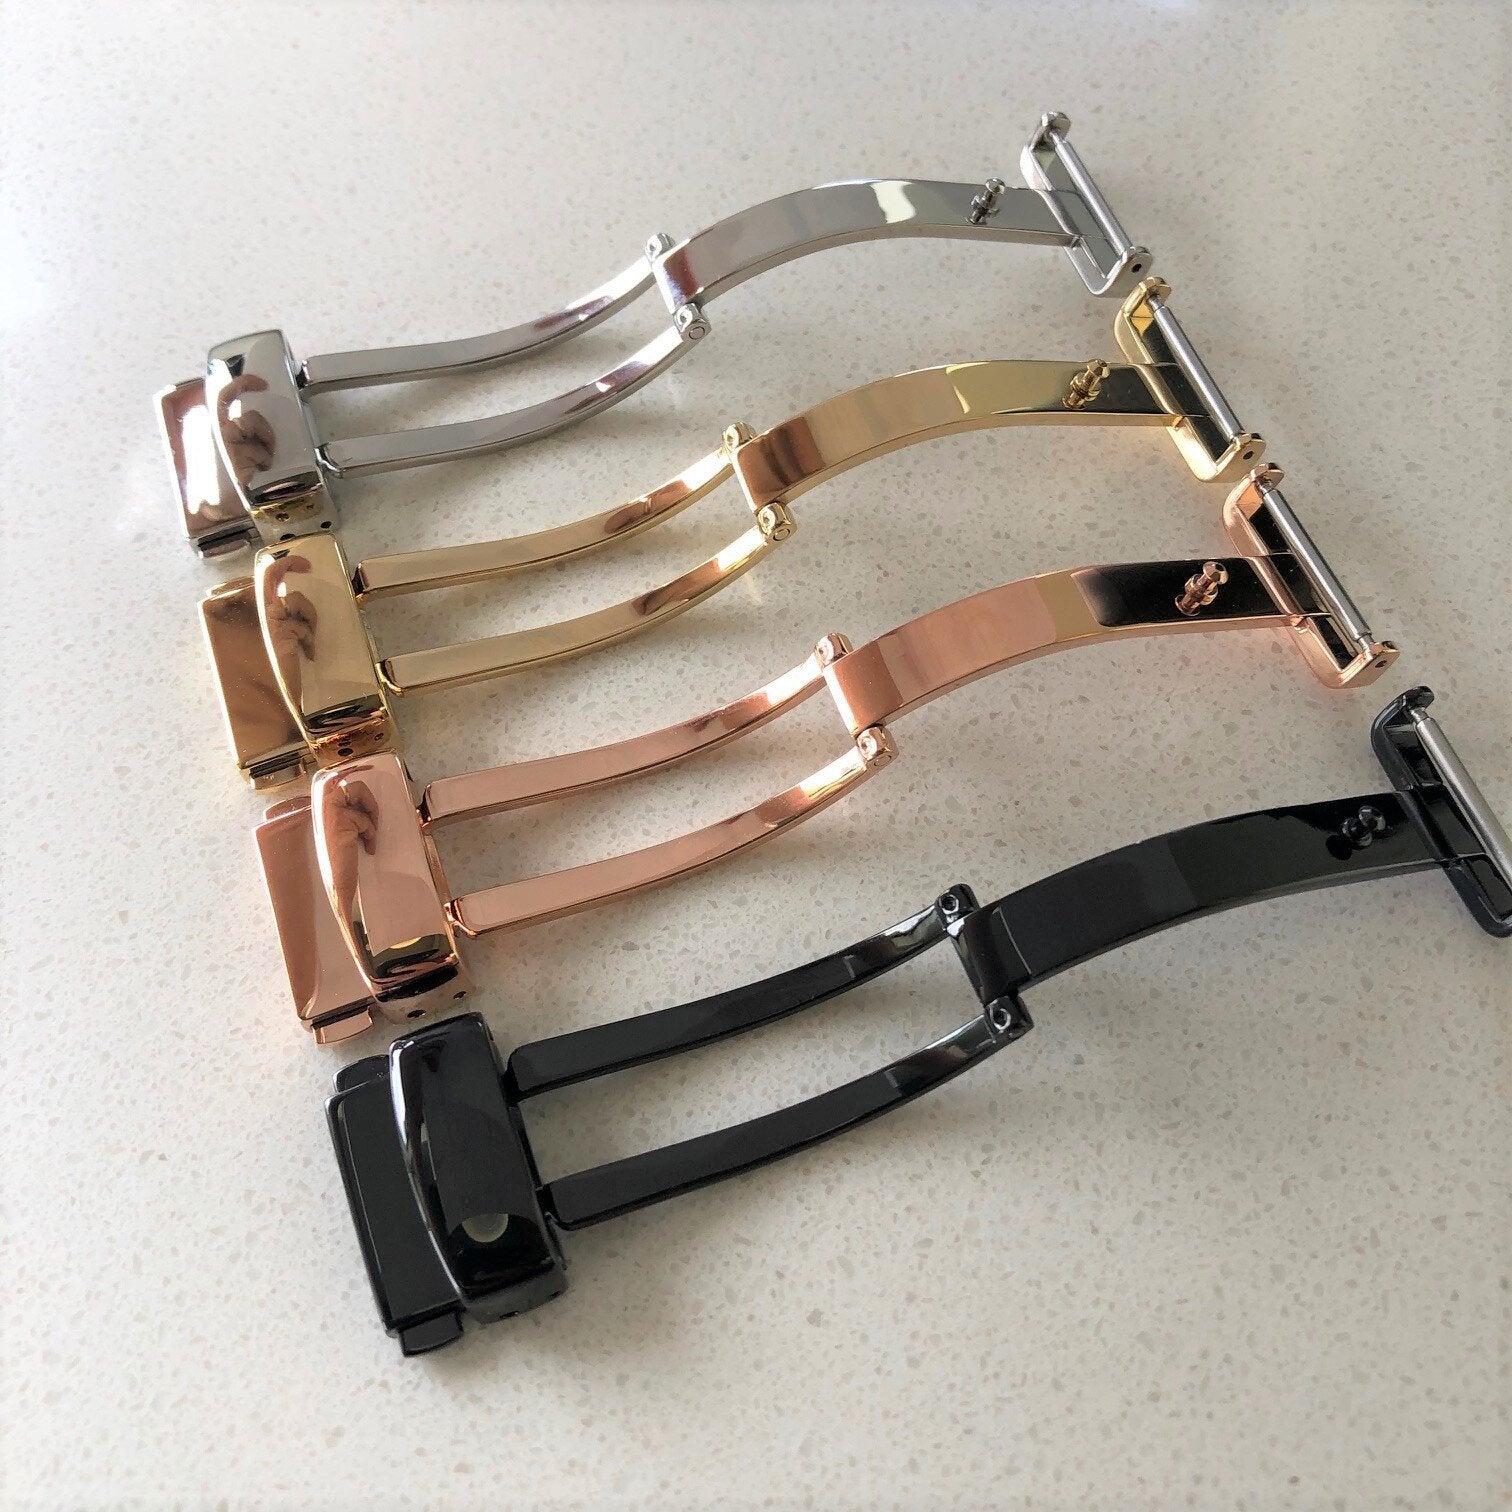 Single Folding Buckle with Push Release